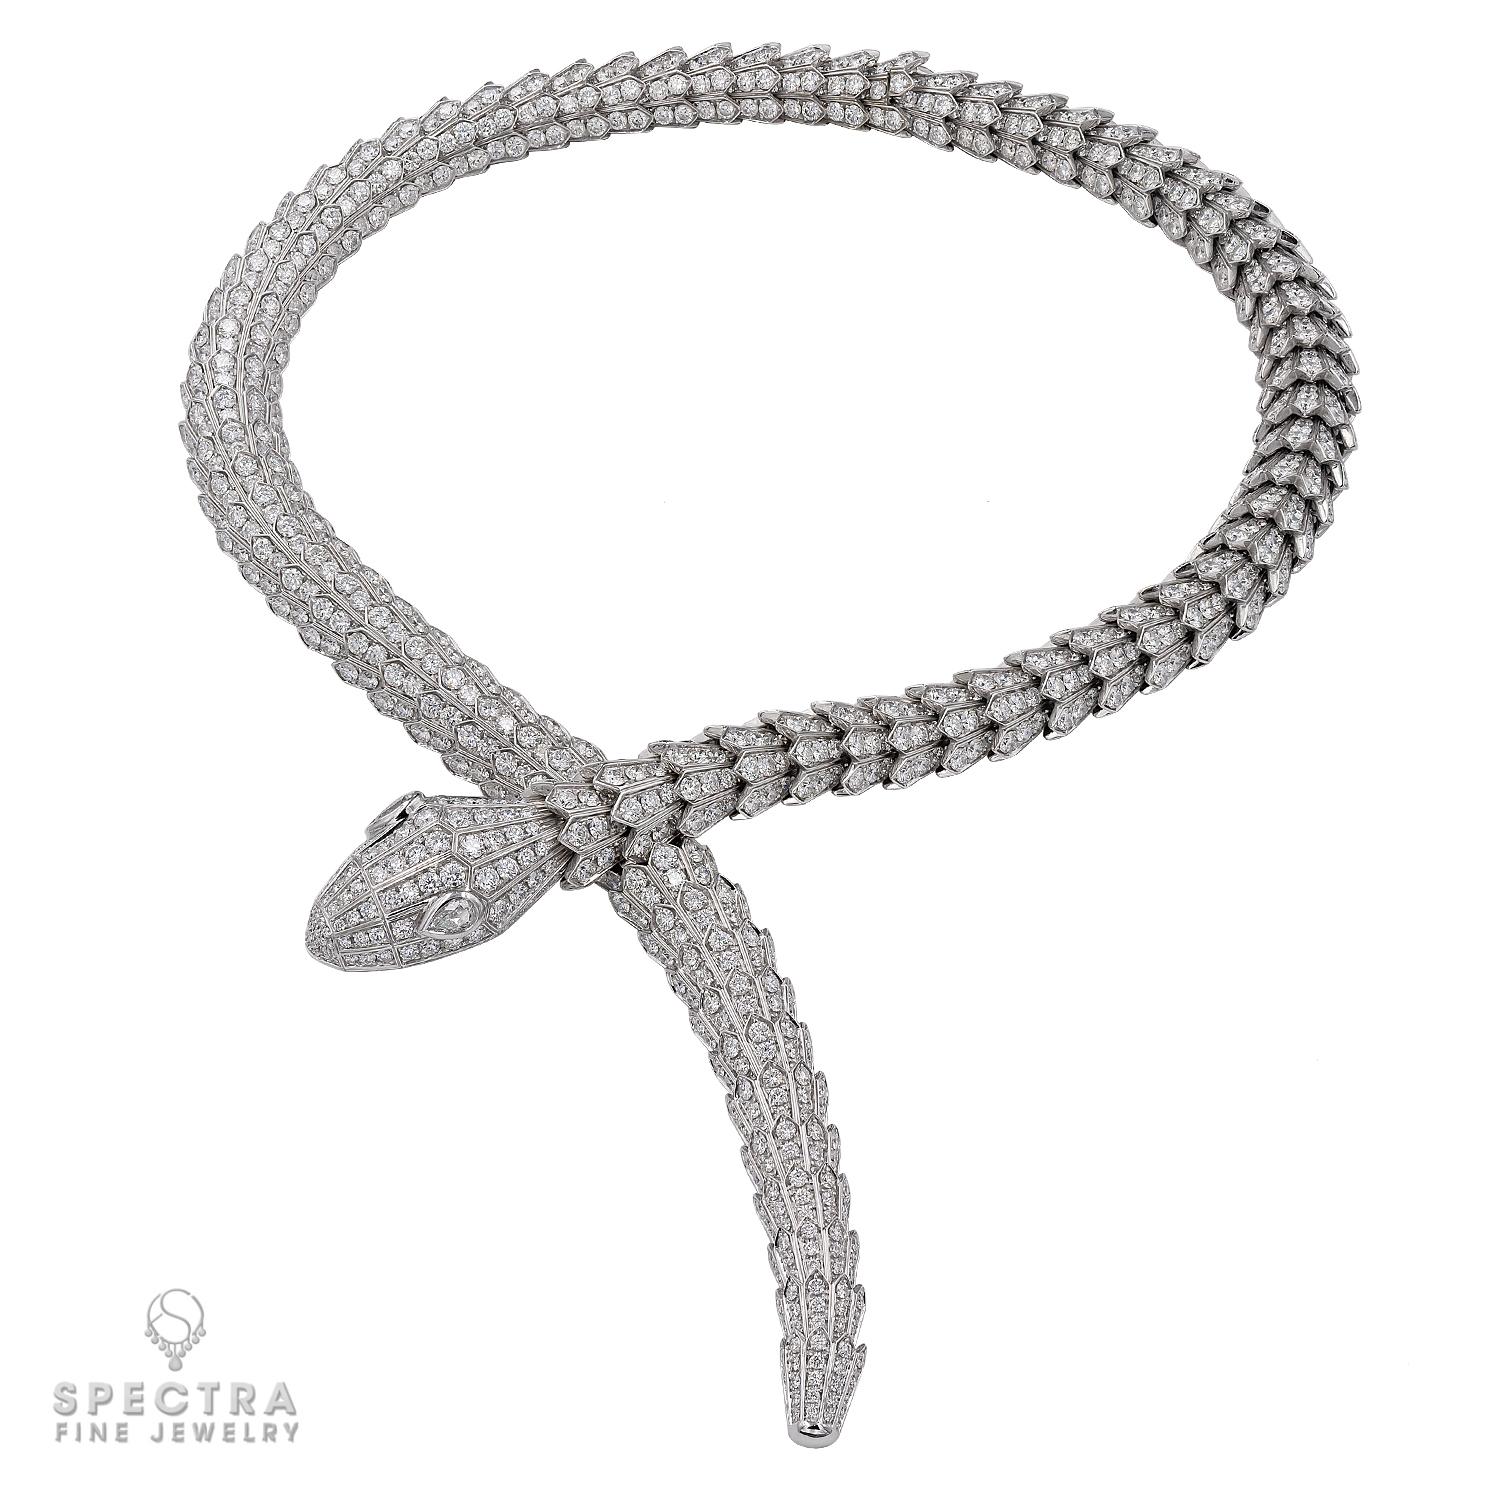 In a tribute to its spirit animal, Bulgari captures the power of seduction in this Serpenti Diamond High Jewelry necklace, camouflaging sensuality and temptation with a hypnotic design. Sophisticated and glamorous, this jewel coils around the neck